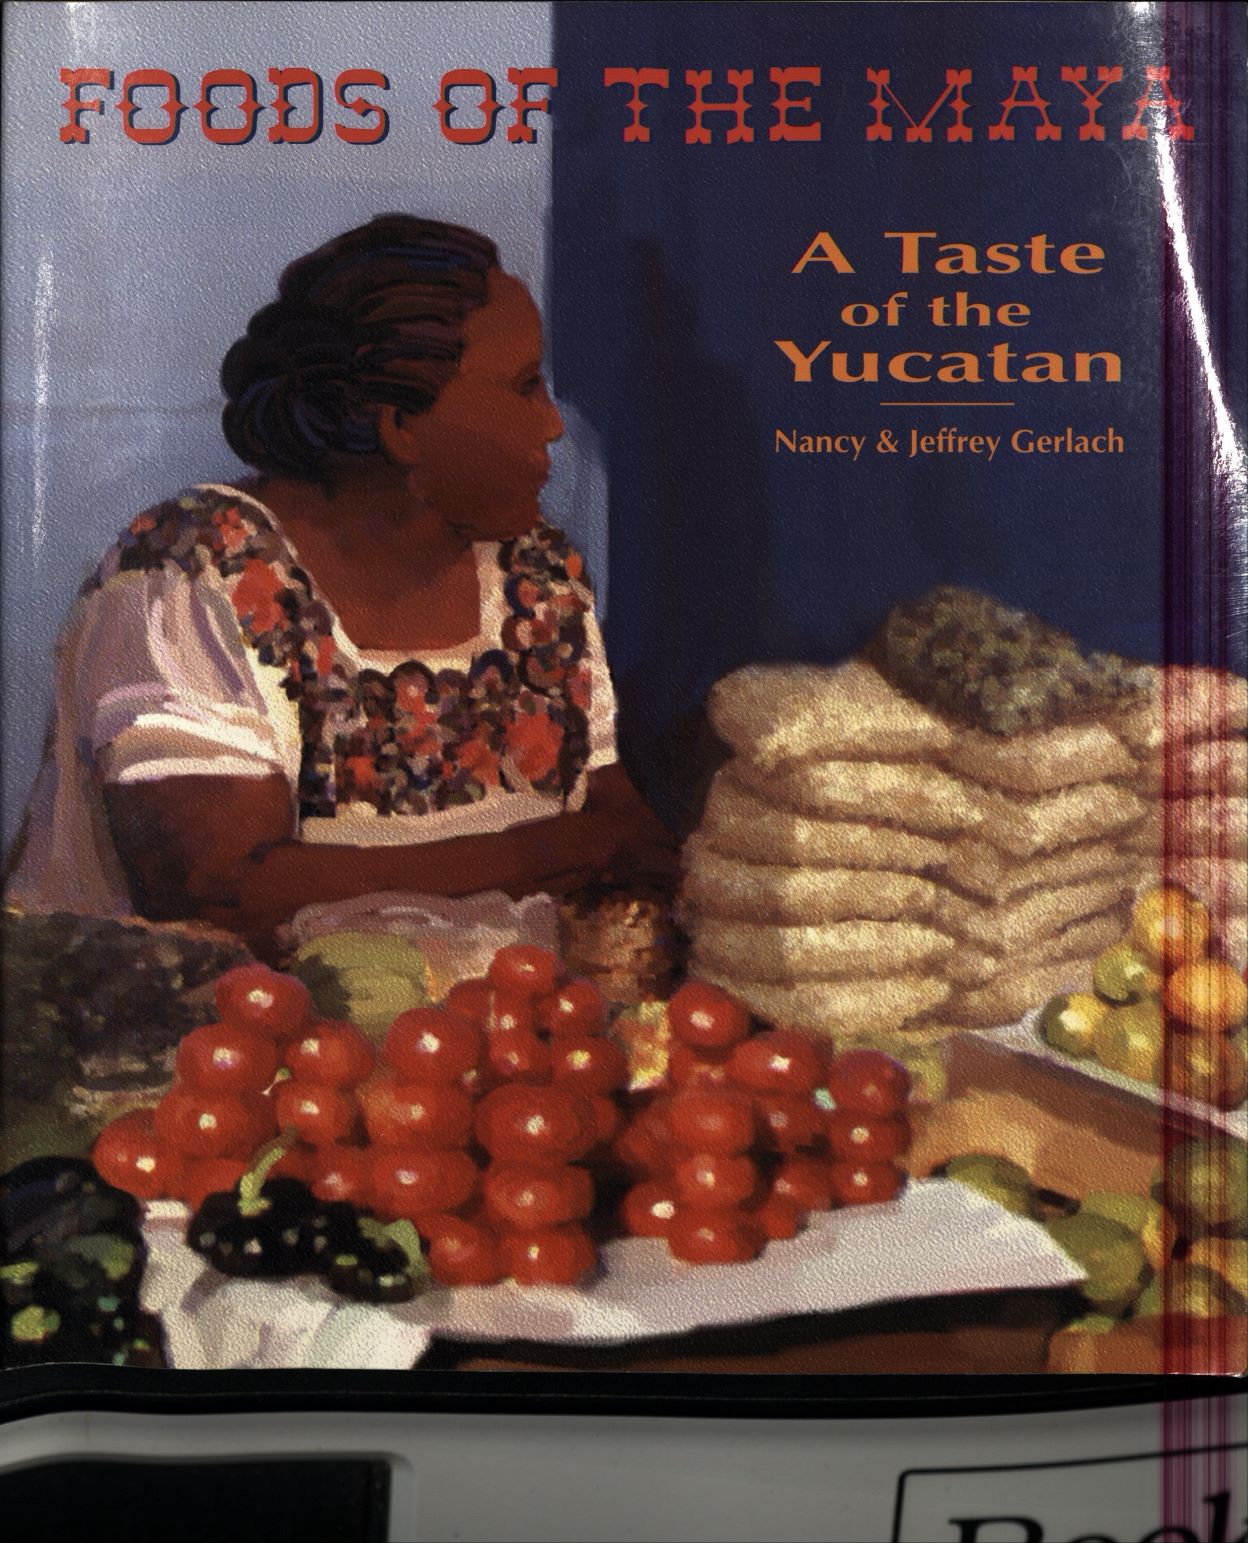 Book cover with an illustration of a Maya feminine figure behind a table of food; text reads: Foods of the Maya: a Taste of the Yucatan; Nancy & Jeffrey Gerlach